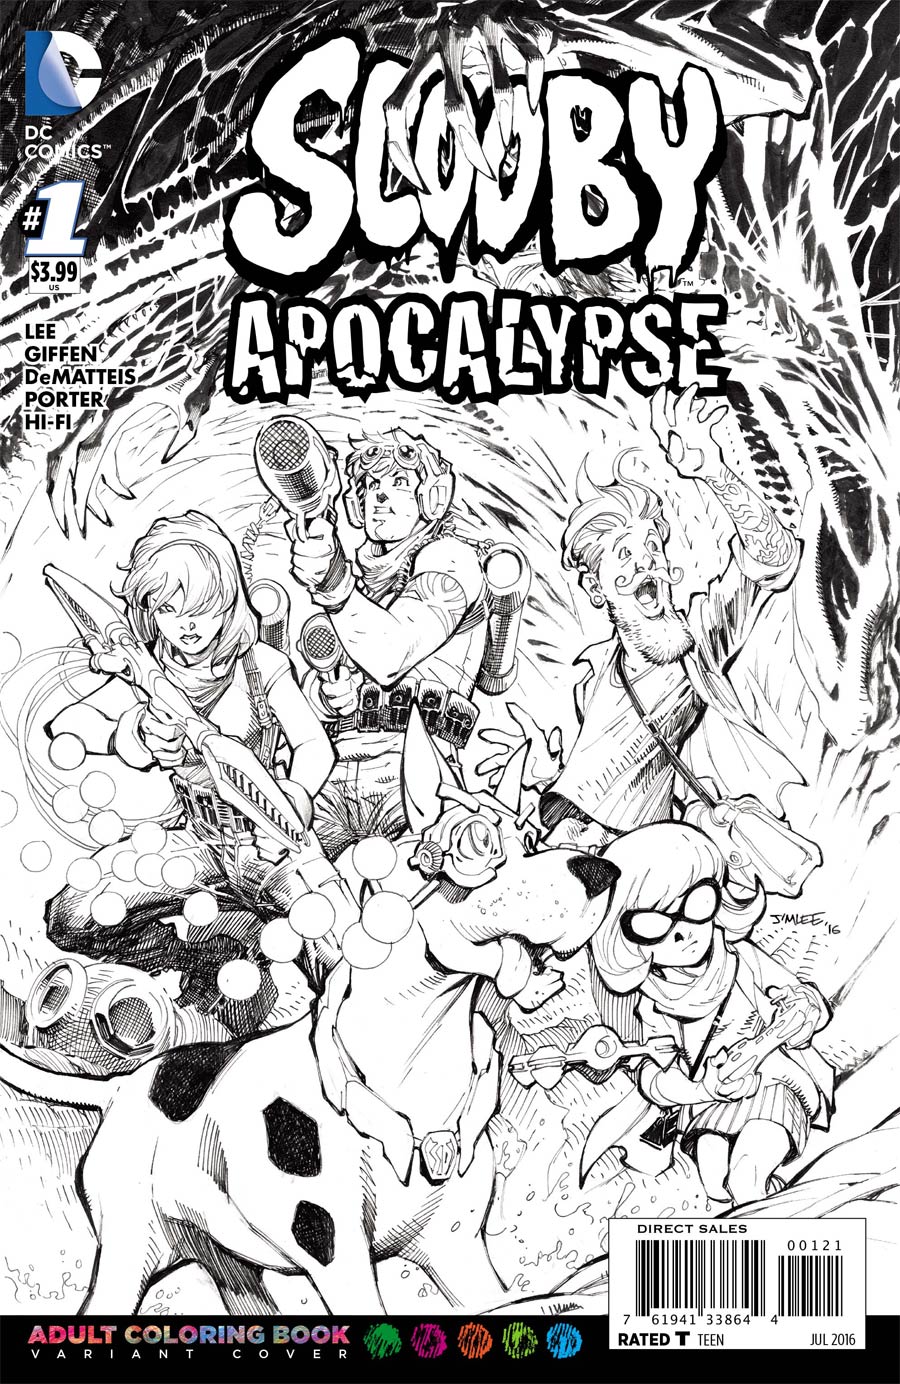 Scooby Apocalypse #1 Cover C Variant Jim Lee Adult Coloring Book Cover